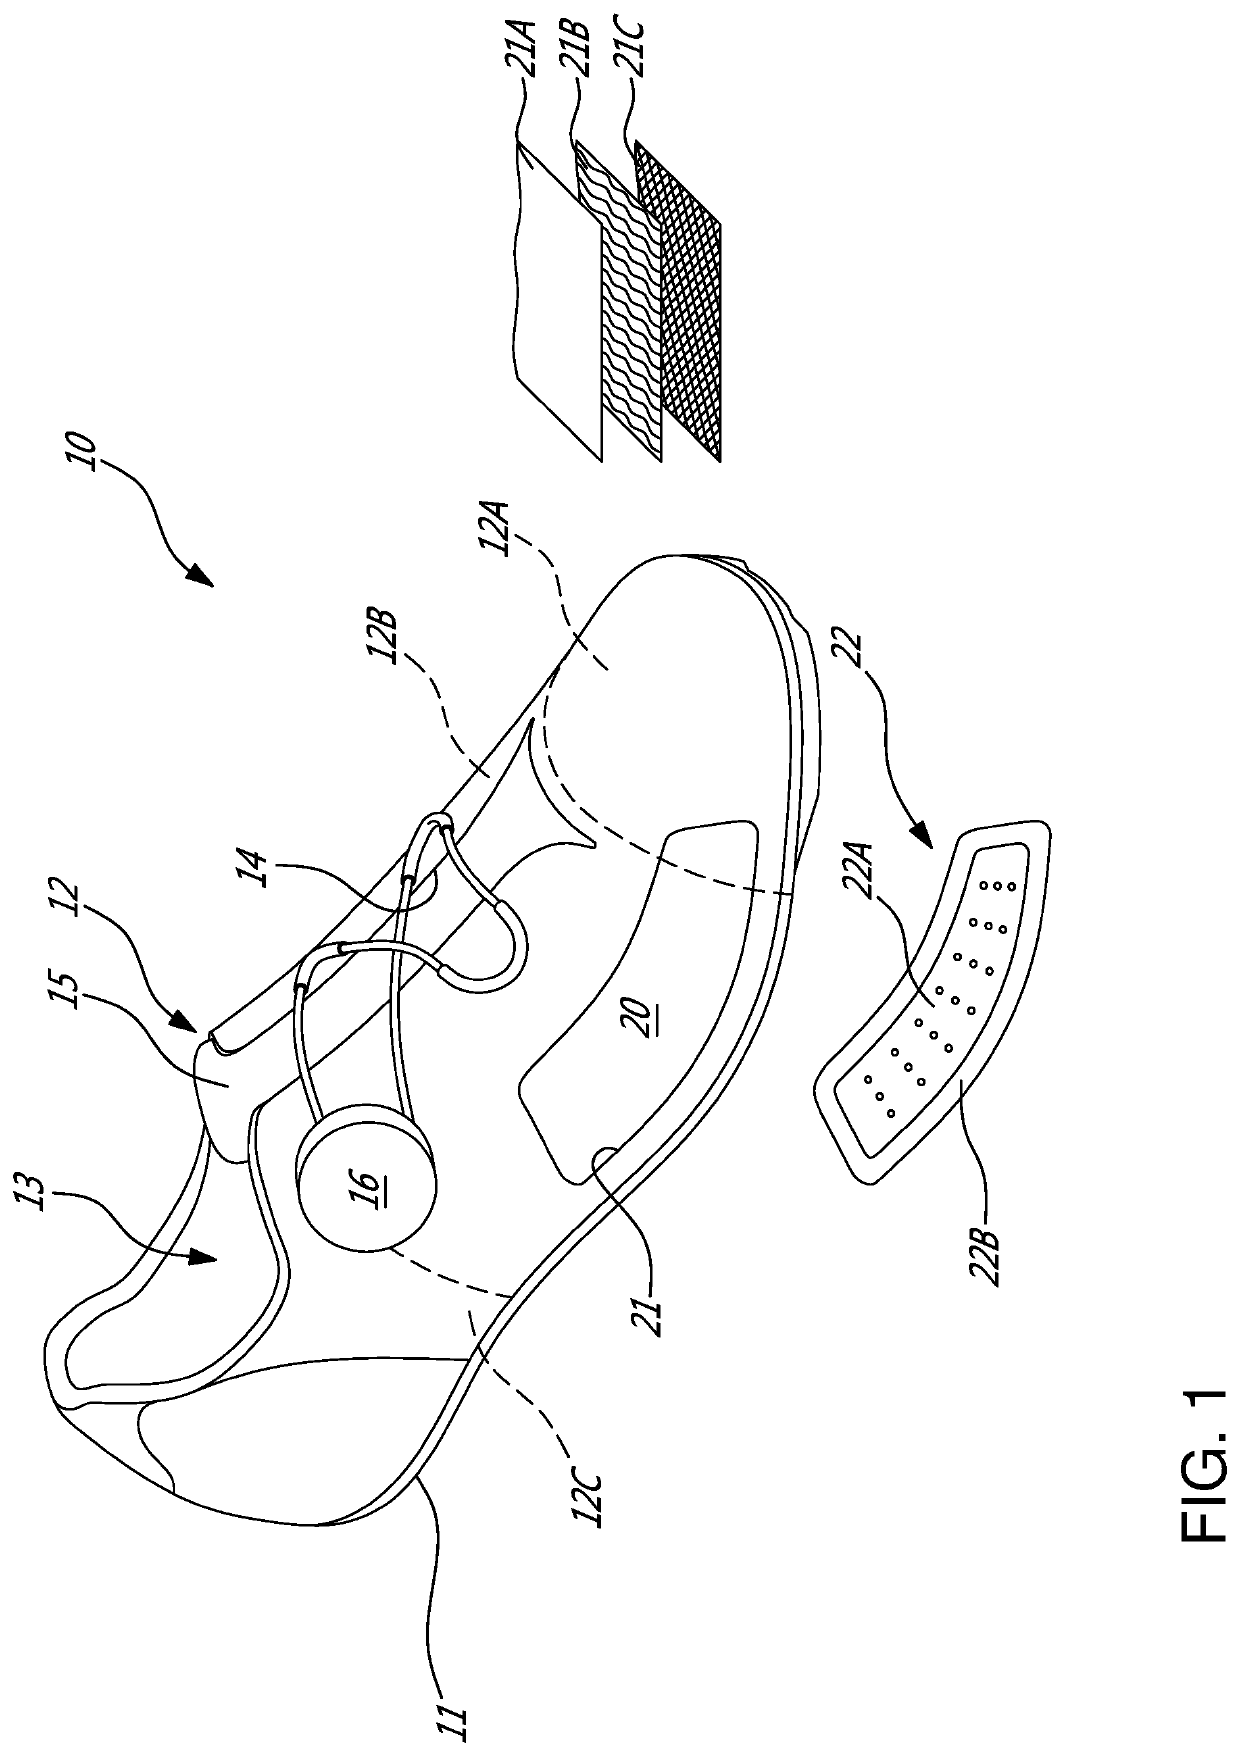 Cycling shoe with lateral metatarsal expansion zone